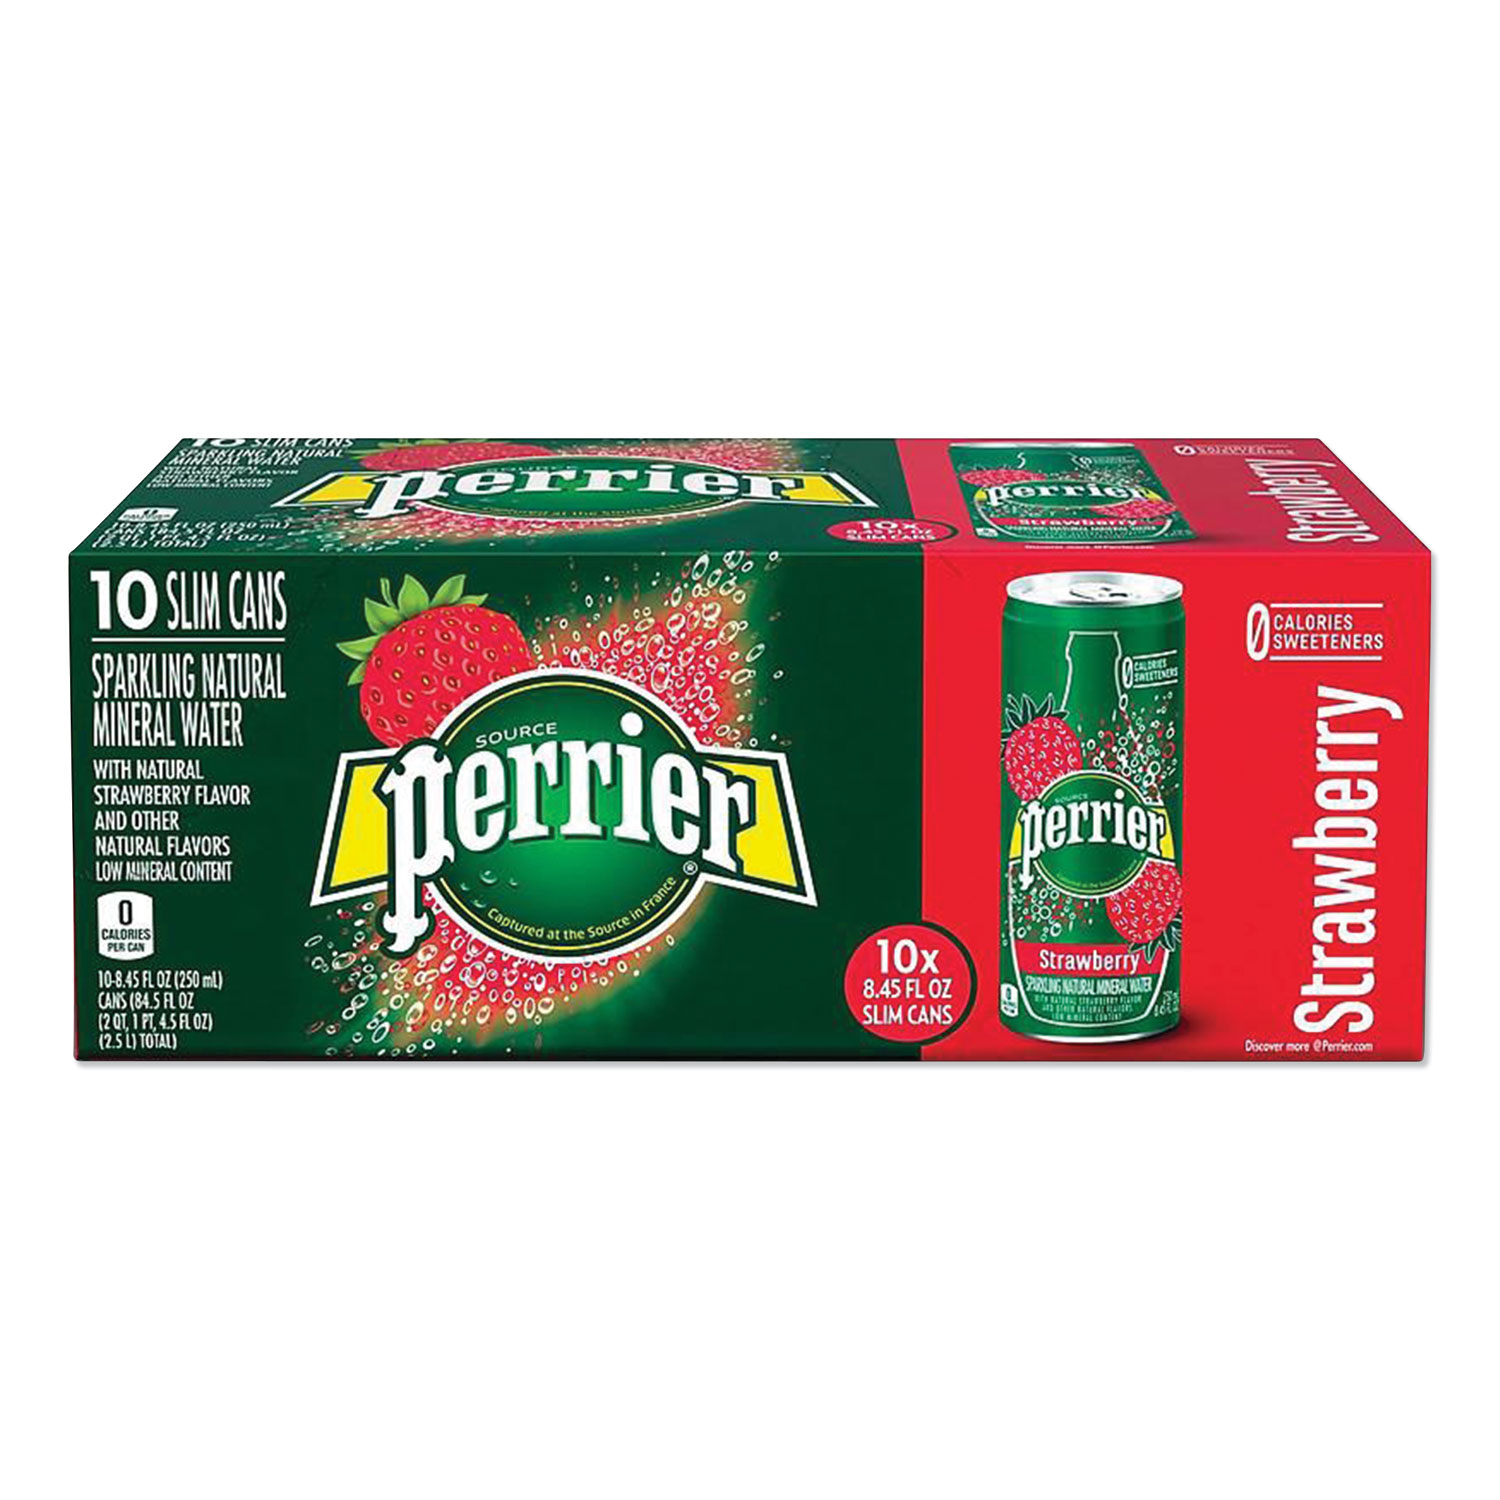  Perrier 12316295 Sparkling Natural Mineral Water, Strawberry, 8.45 oz Can, 10 Cans/Pack (PRR2618607) 